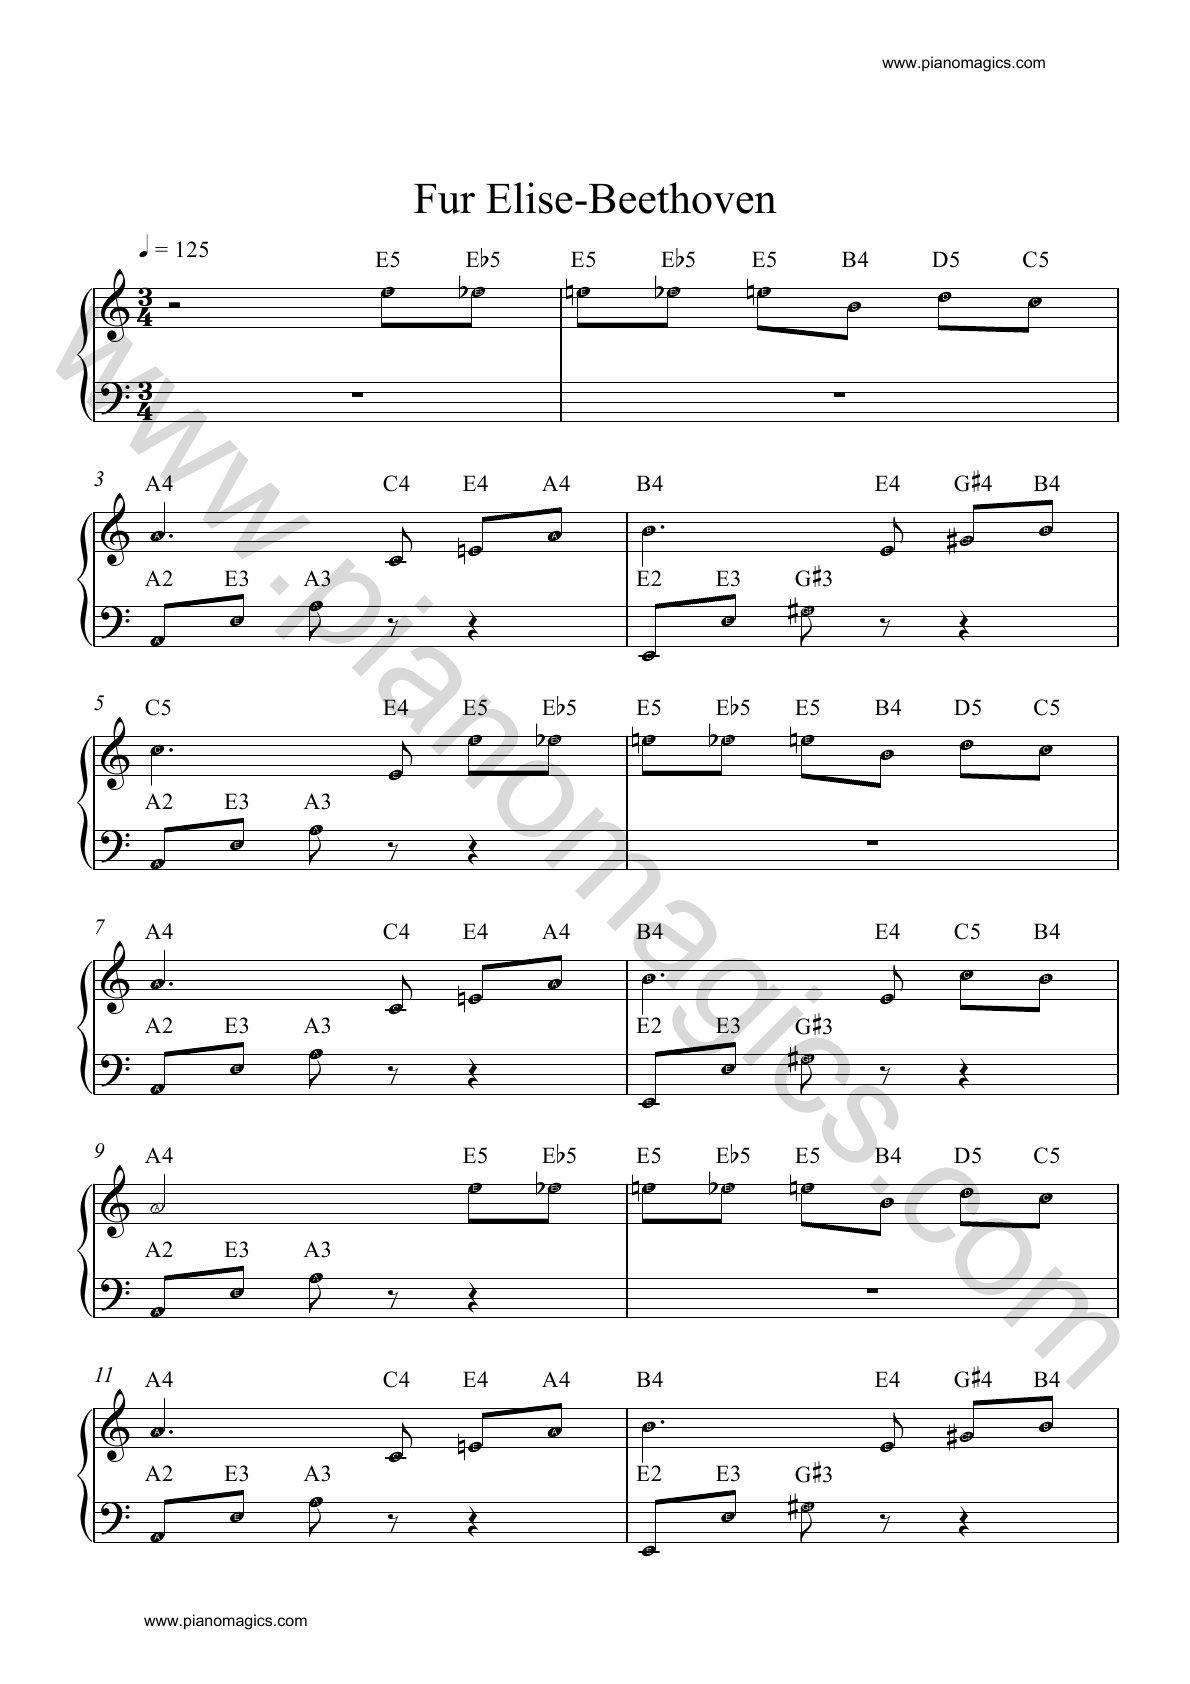 Get Your Beethoven Fur Elise Sheet Music For Piano Along With Notes